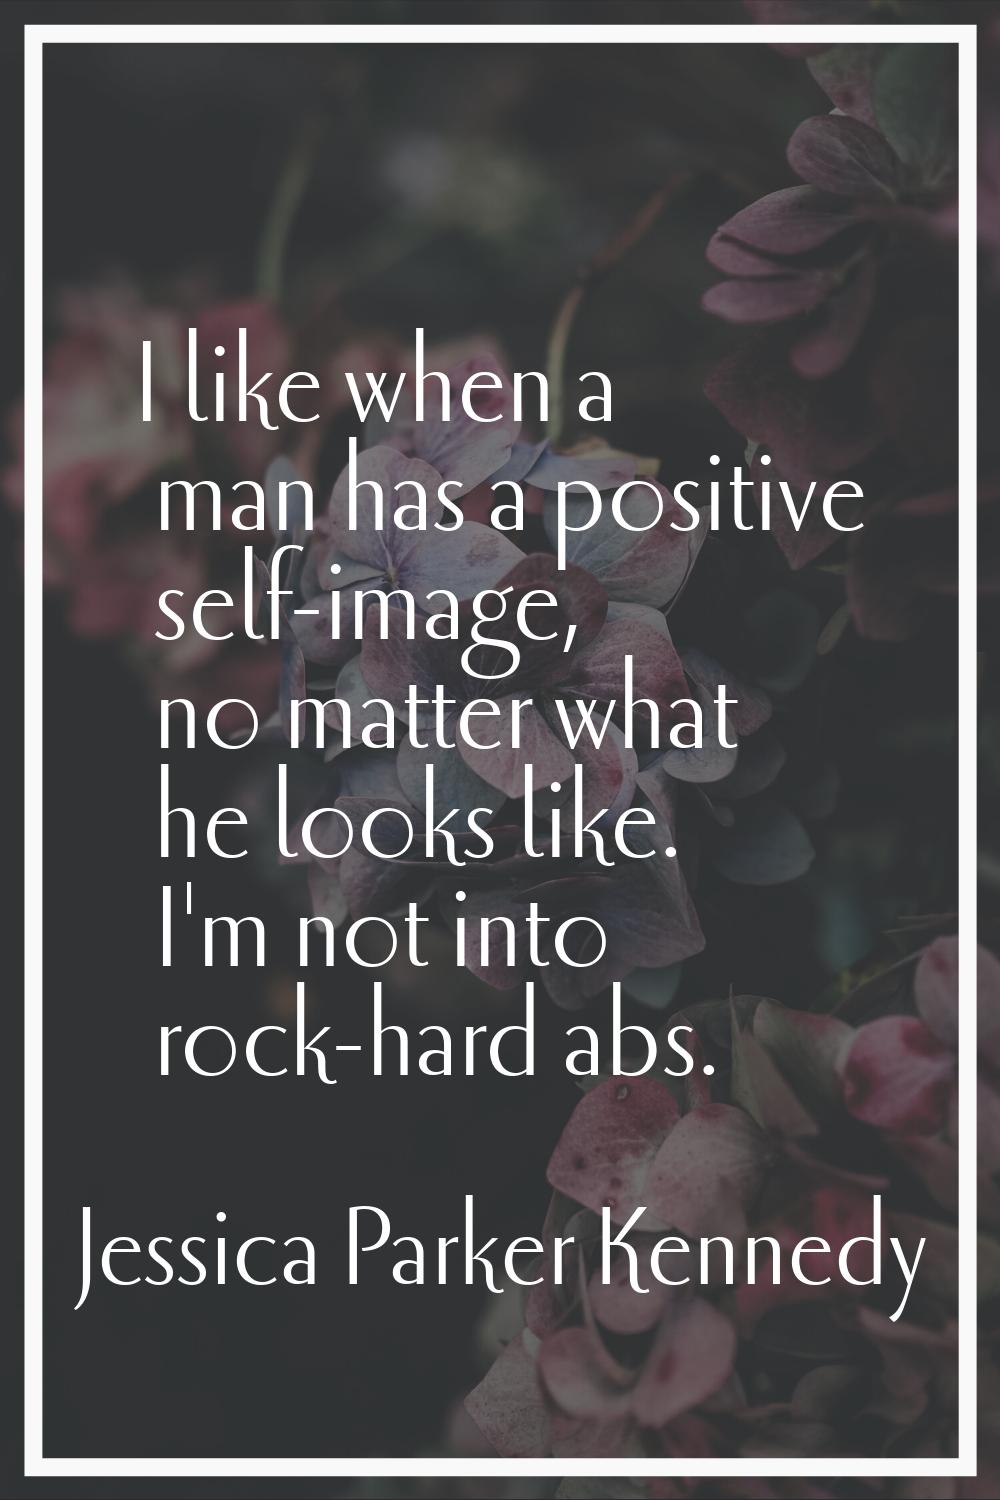 I like when a man has a positive self-image, no matter what he looks like. I'm not into rock-hard a